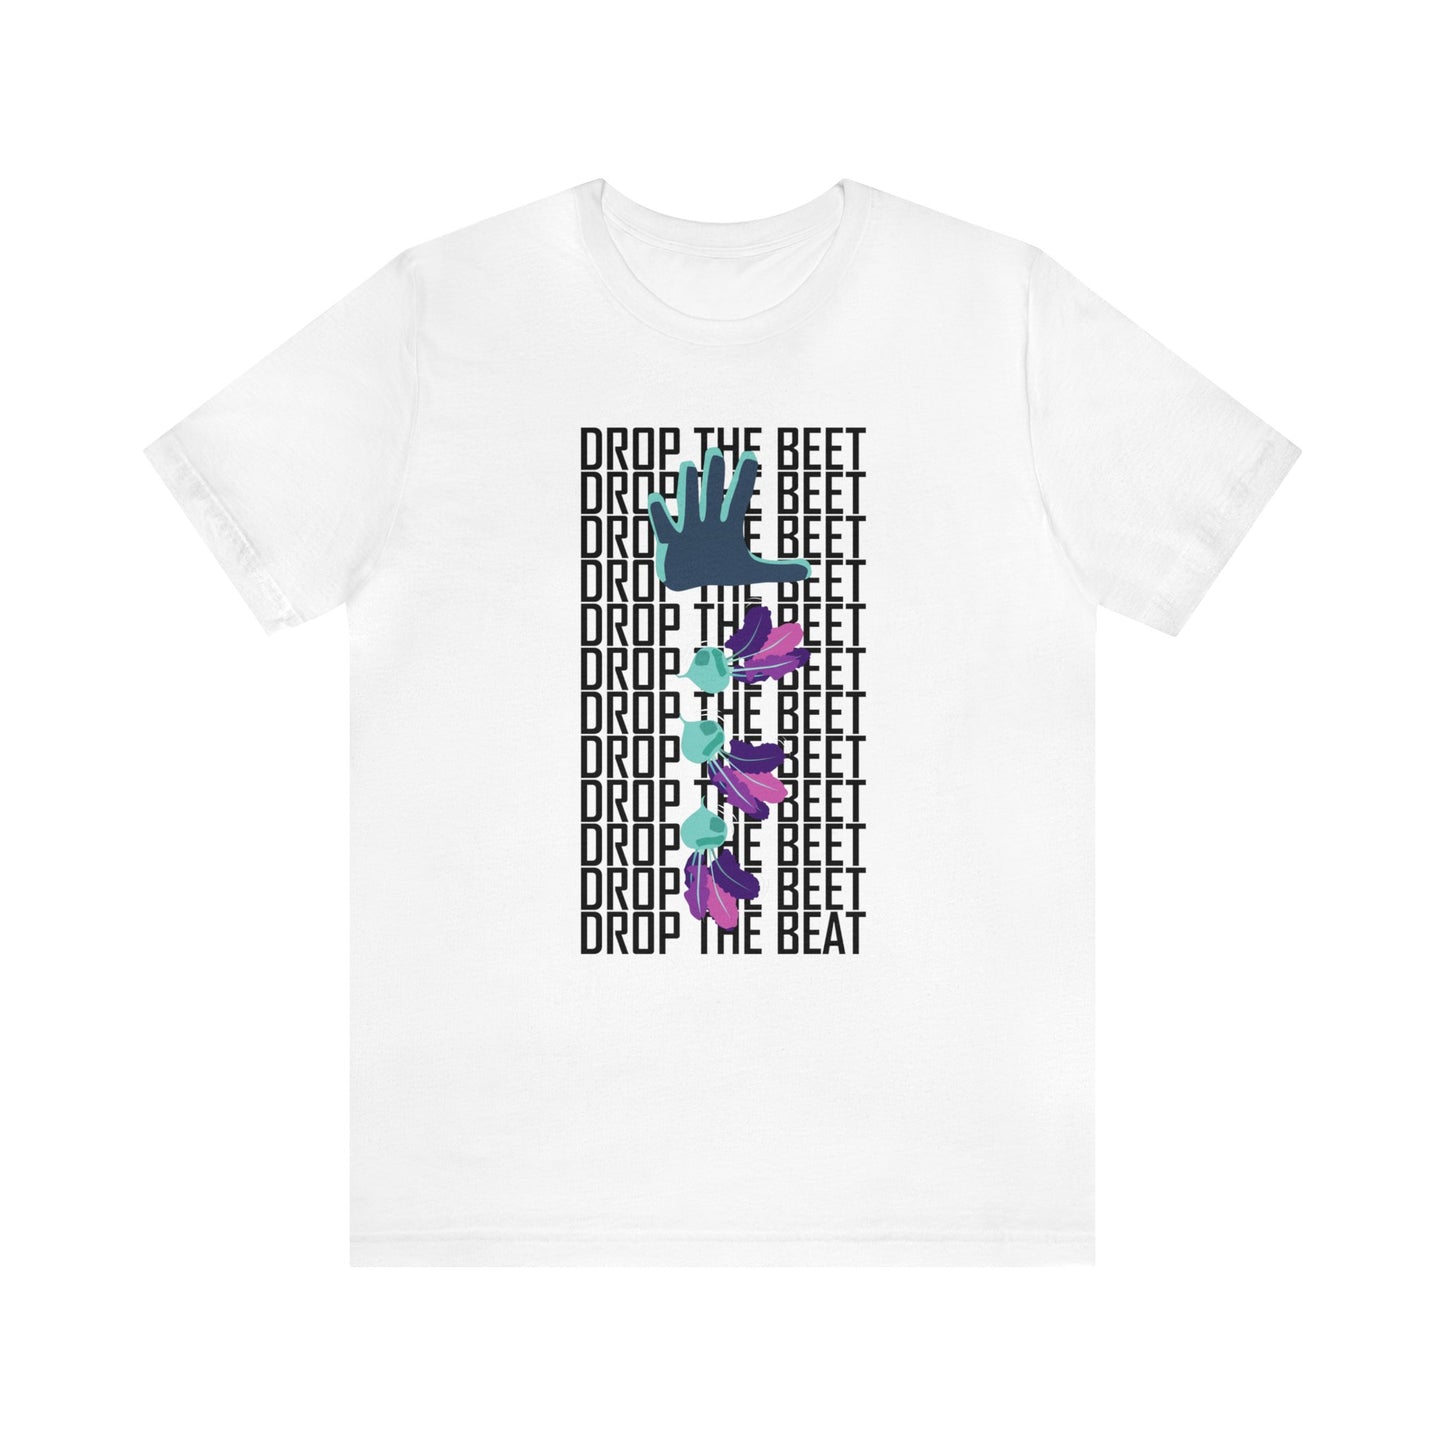 Music pun graphic tee.  Picture of a hand dropping a beet with the words "drop the beet" and "drop the beat" arrayed behind the graphic.  White shirt.